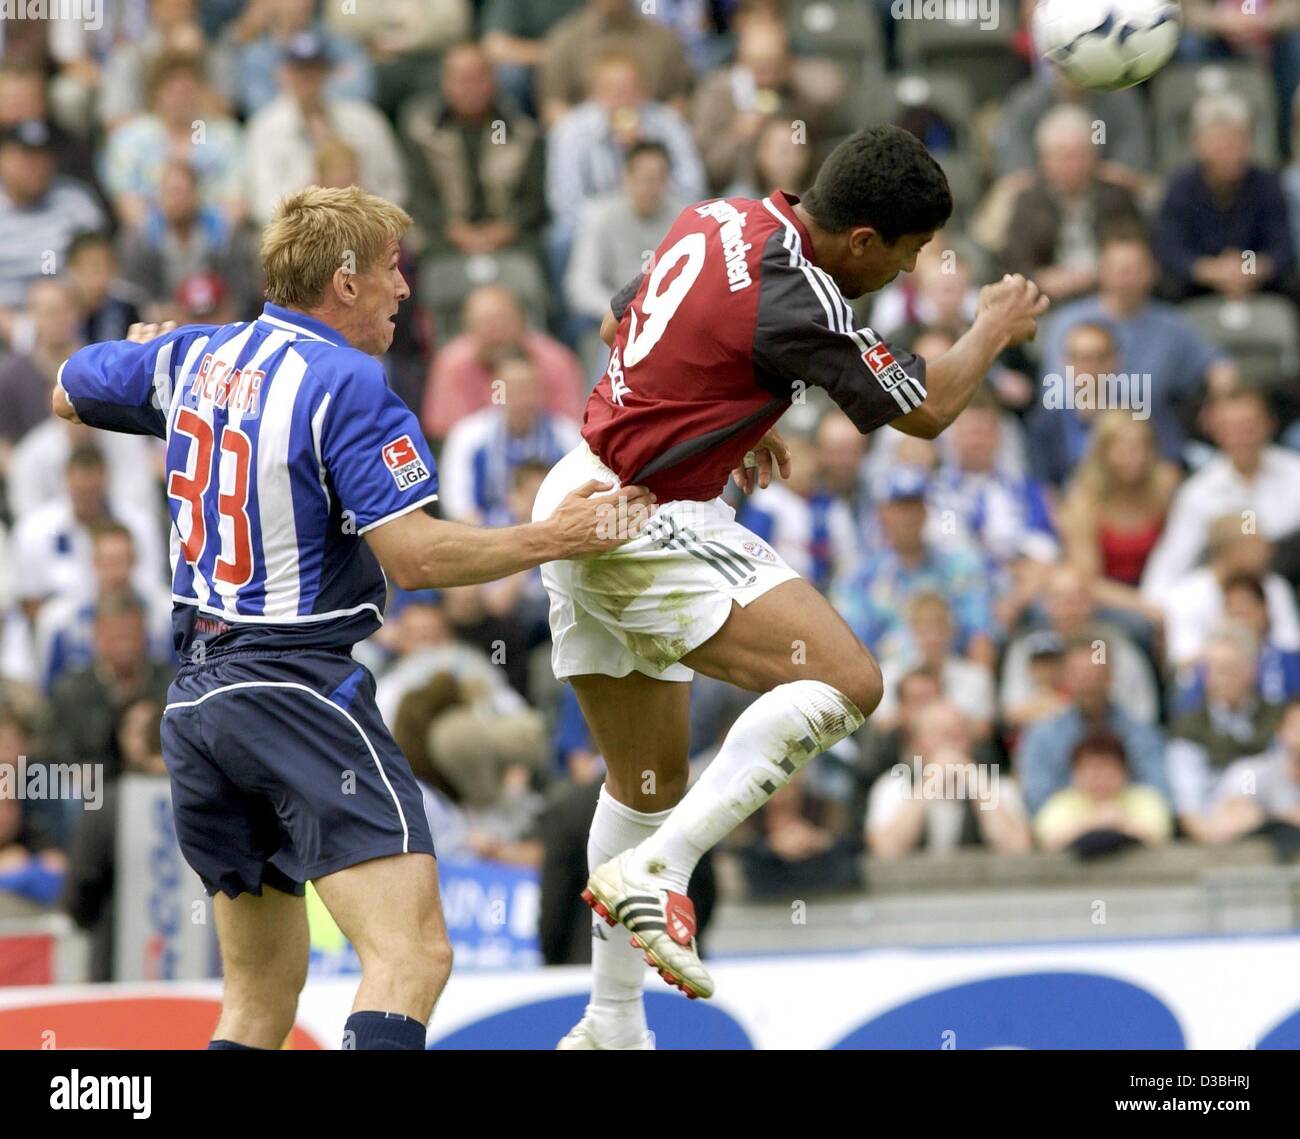 (dpa) - Bayern's Brazilian forward Giovane Elber (R) scores a goal with a header while Hertha's defender Marko Rehmer can just stand by, during the Bundesliga soccer game FC Bayern Munich against Hertha BSC Berlin in Berlin, 10 May 2003. Bayern Munich wins 6-3. Stock Photo